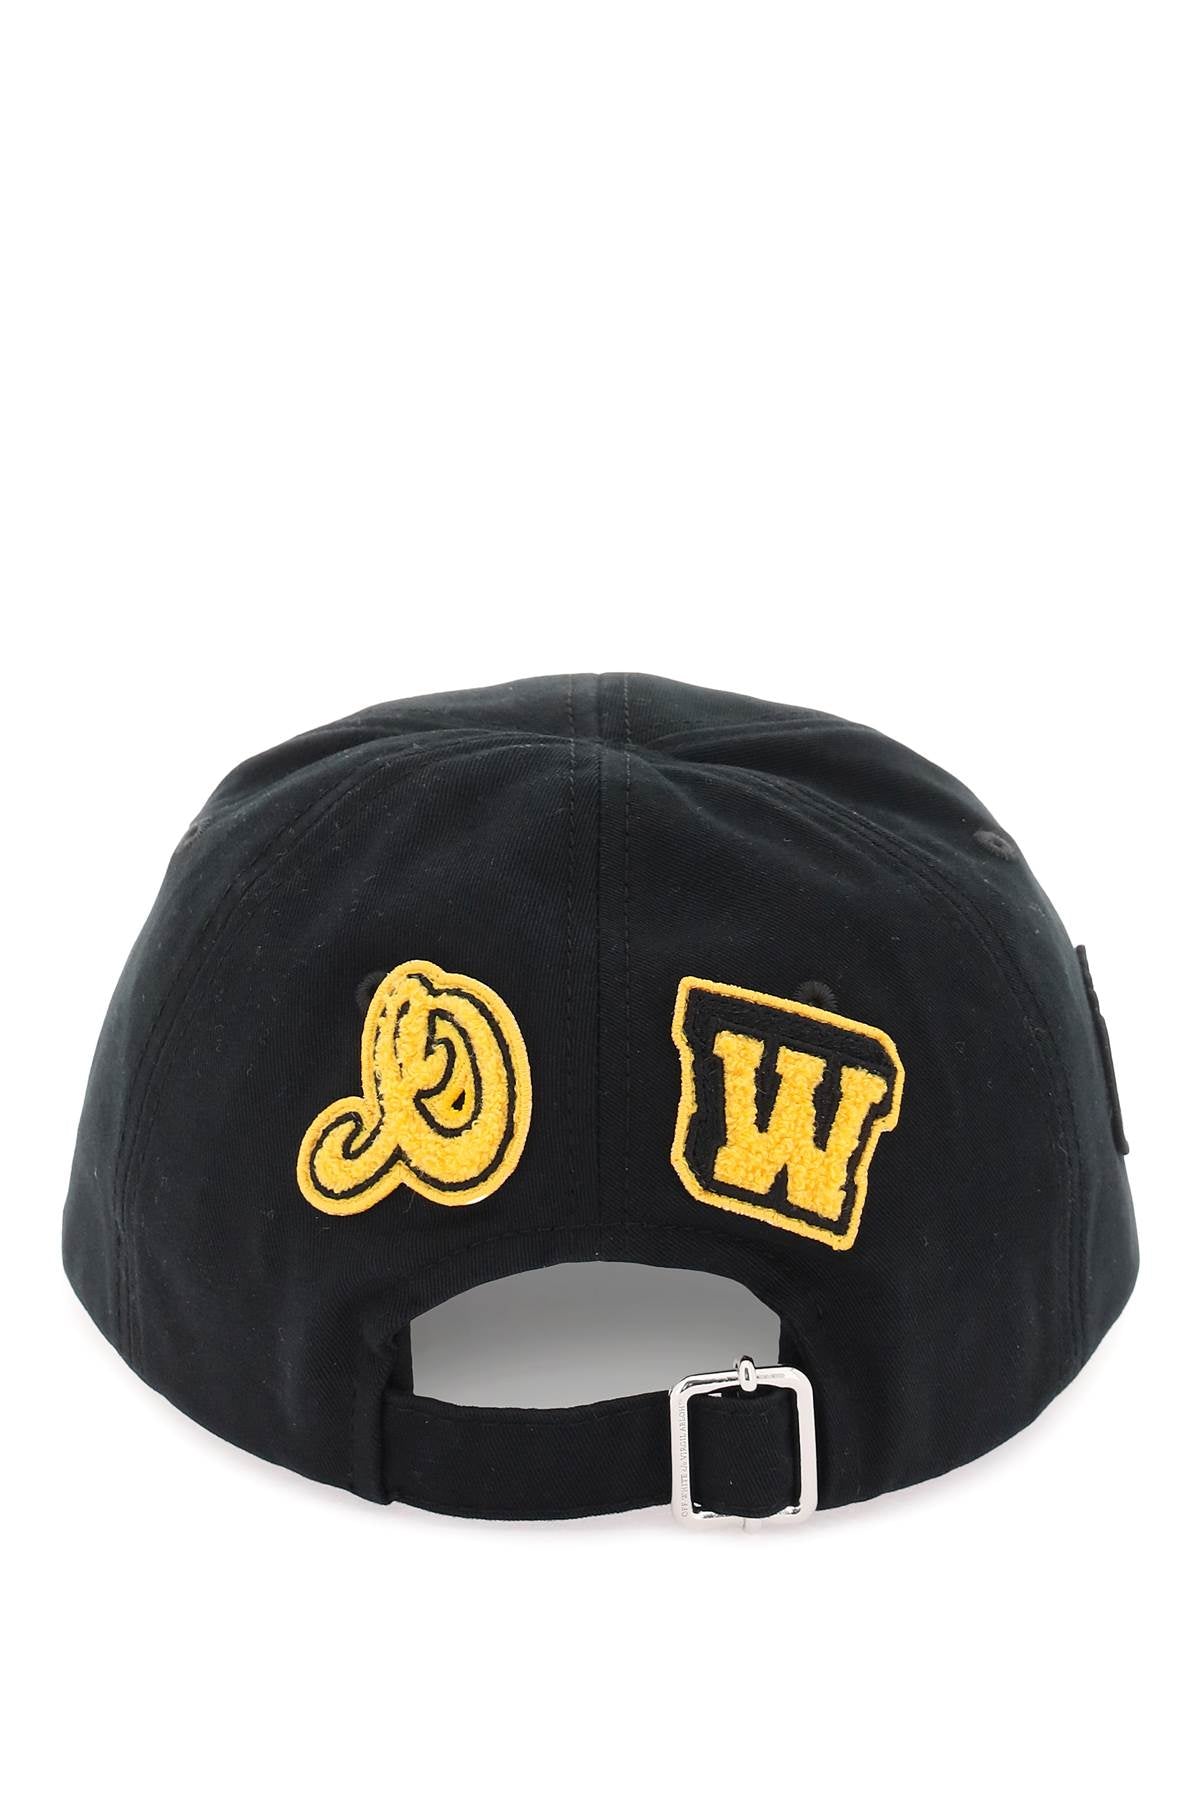 Off-White Baseball Cap With Patch Black